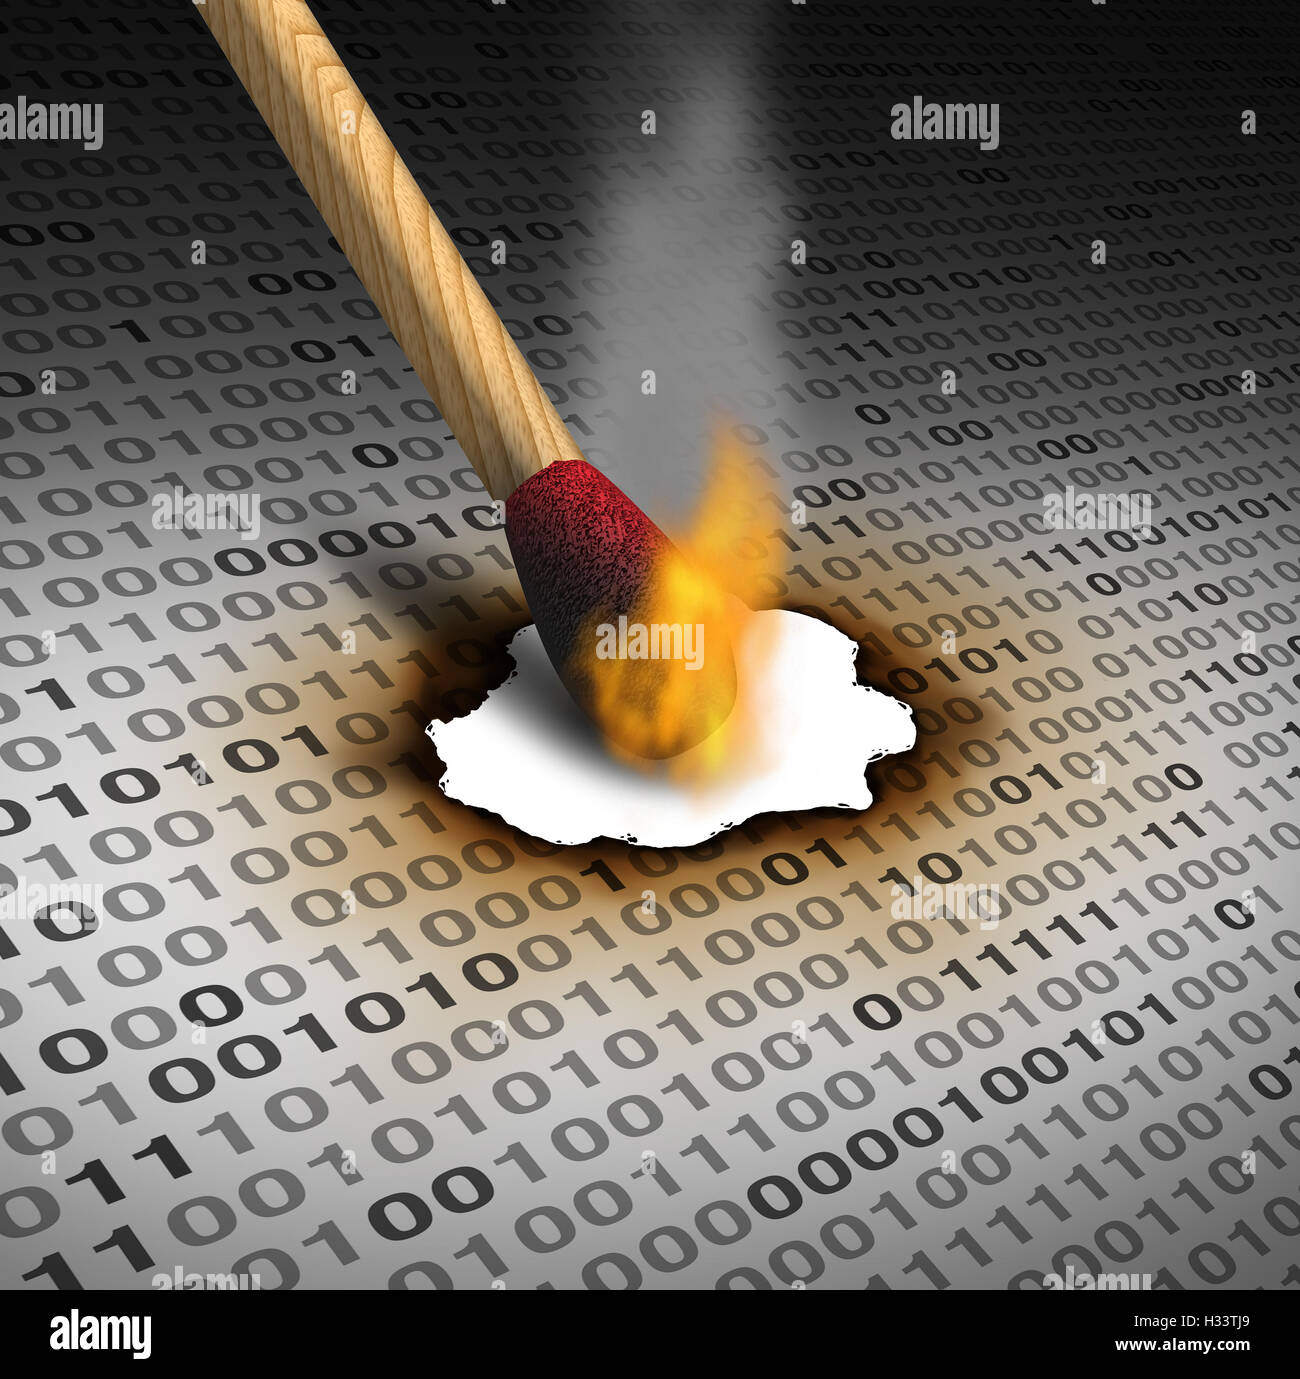 Delete data and deleting information as a technology concept with a lit match burning binary code as an internet security symbol or to eliminate and destroy an email or clean a hard drive server with 3D illustration elements. Stock Photo